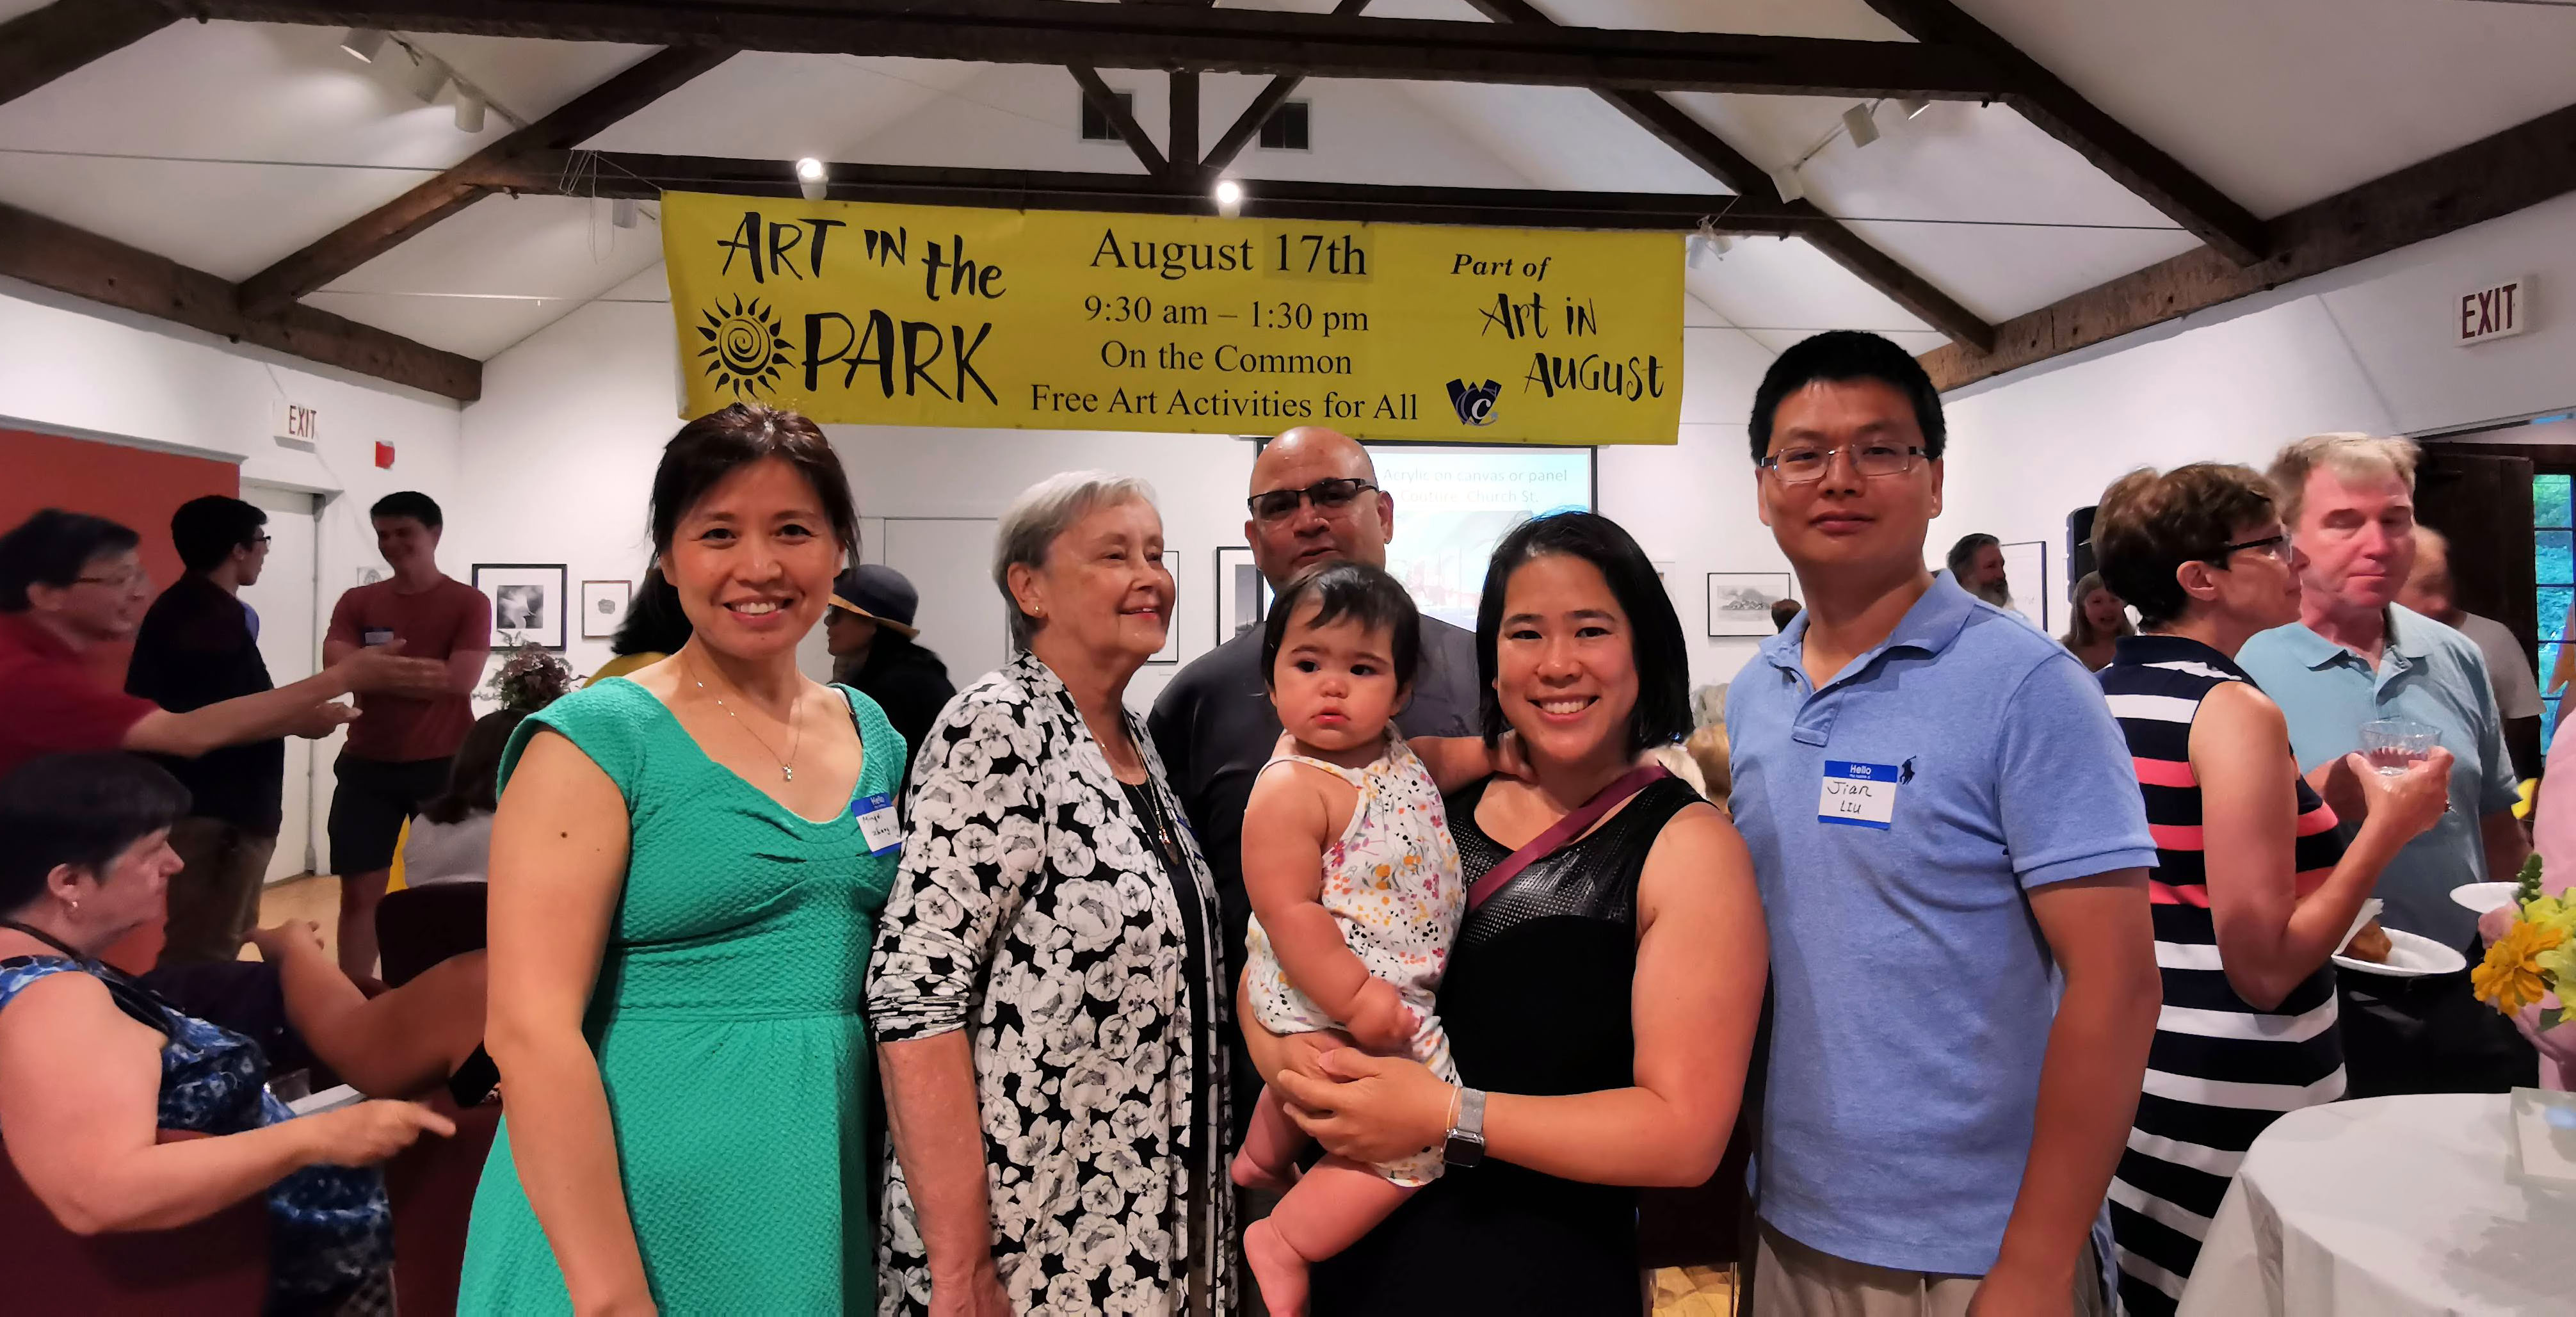 Lisa Wong and family with WCC members, Art in August 2019